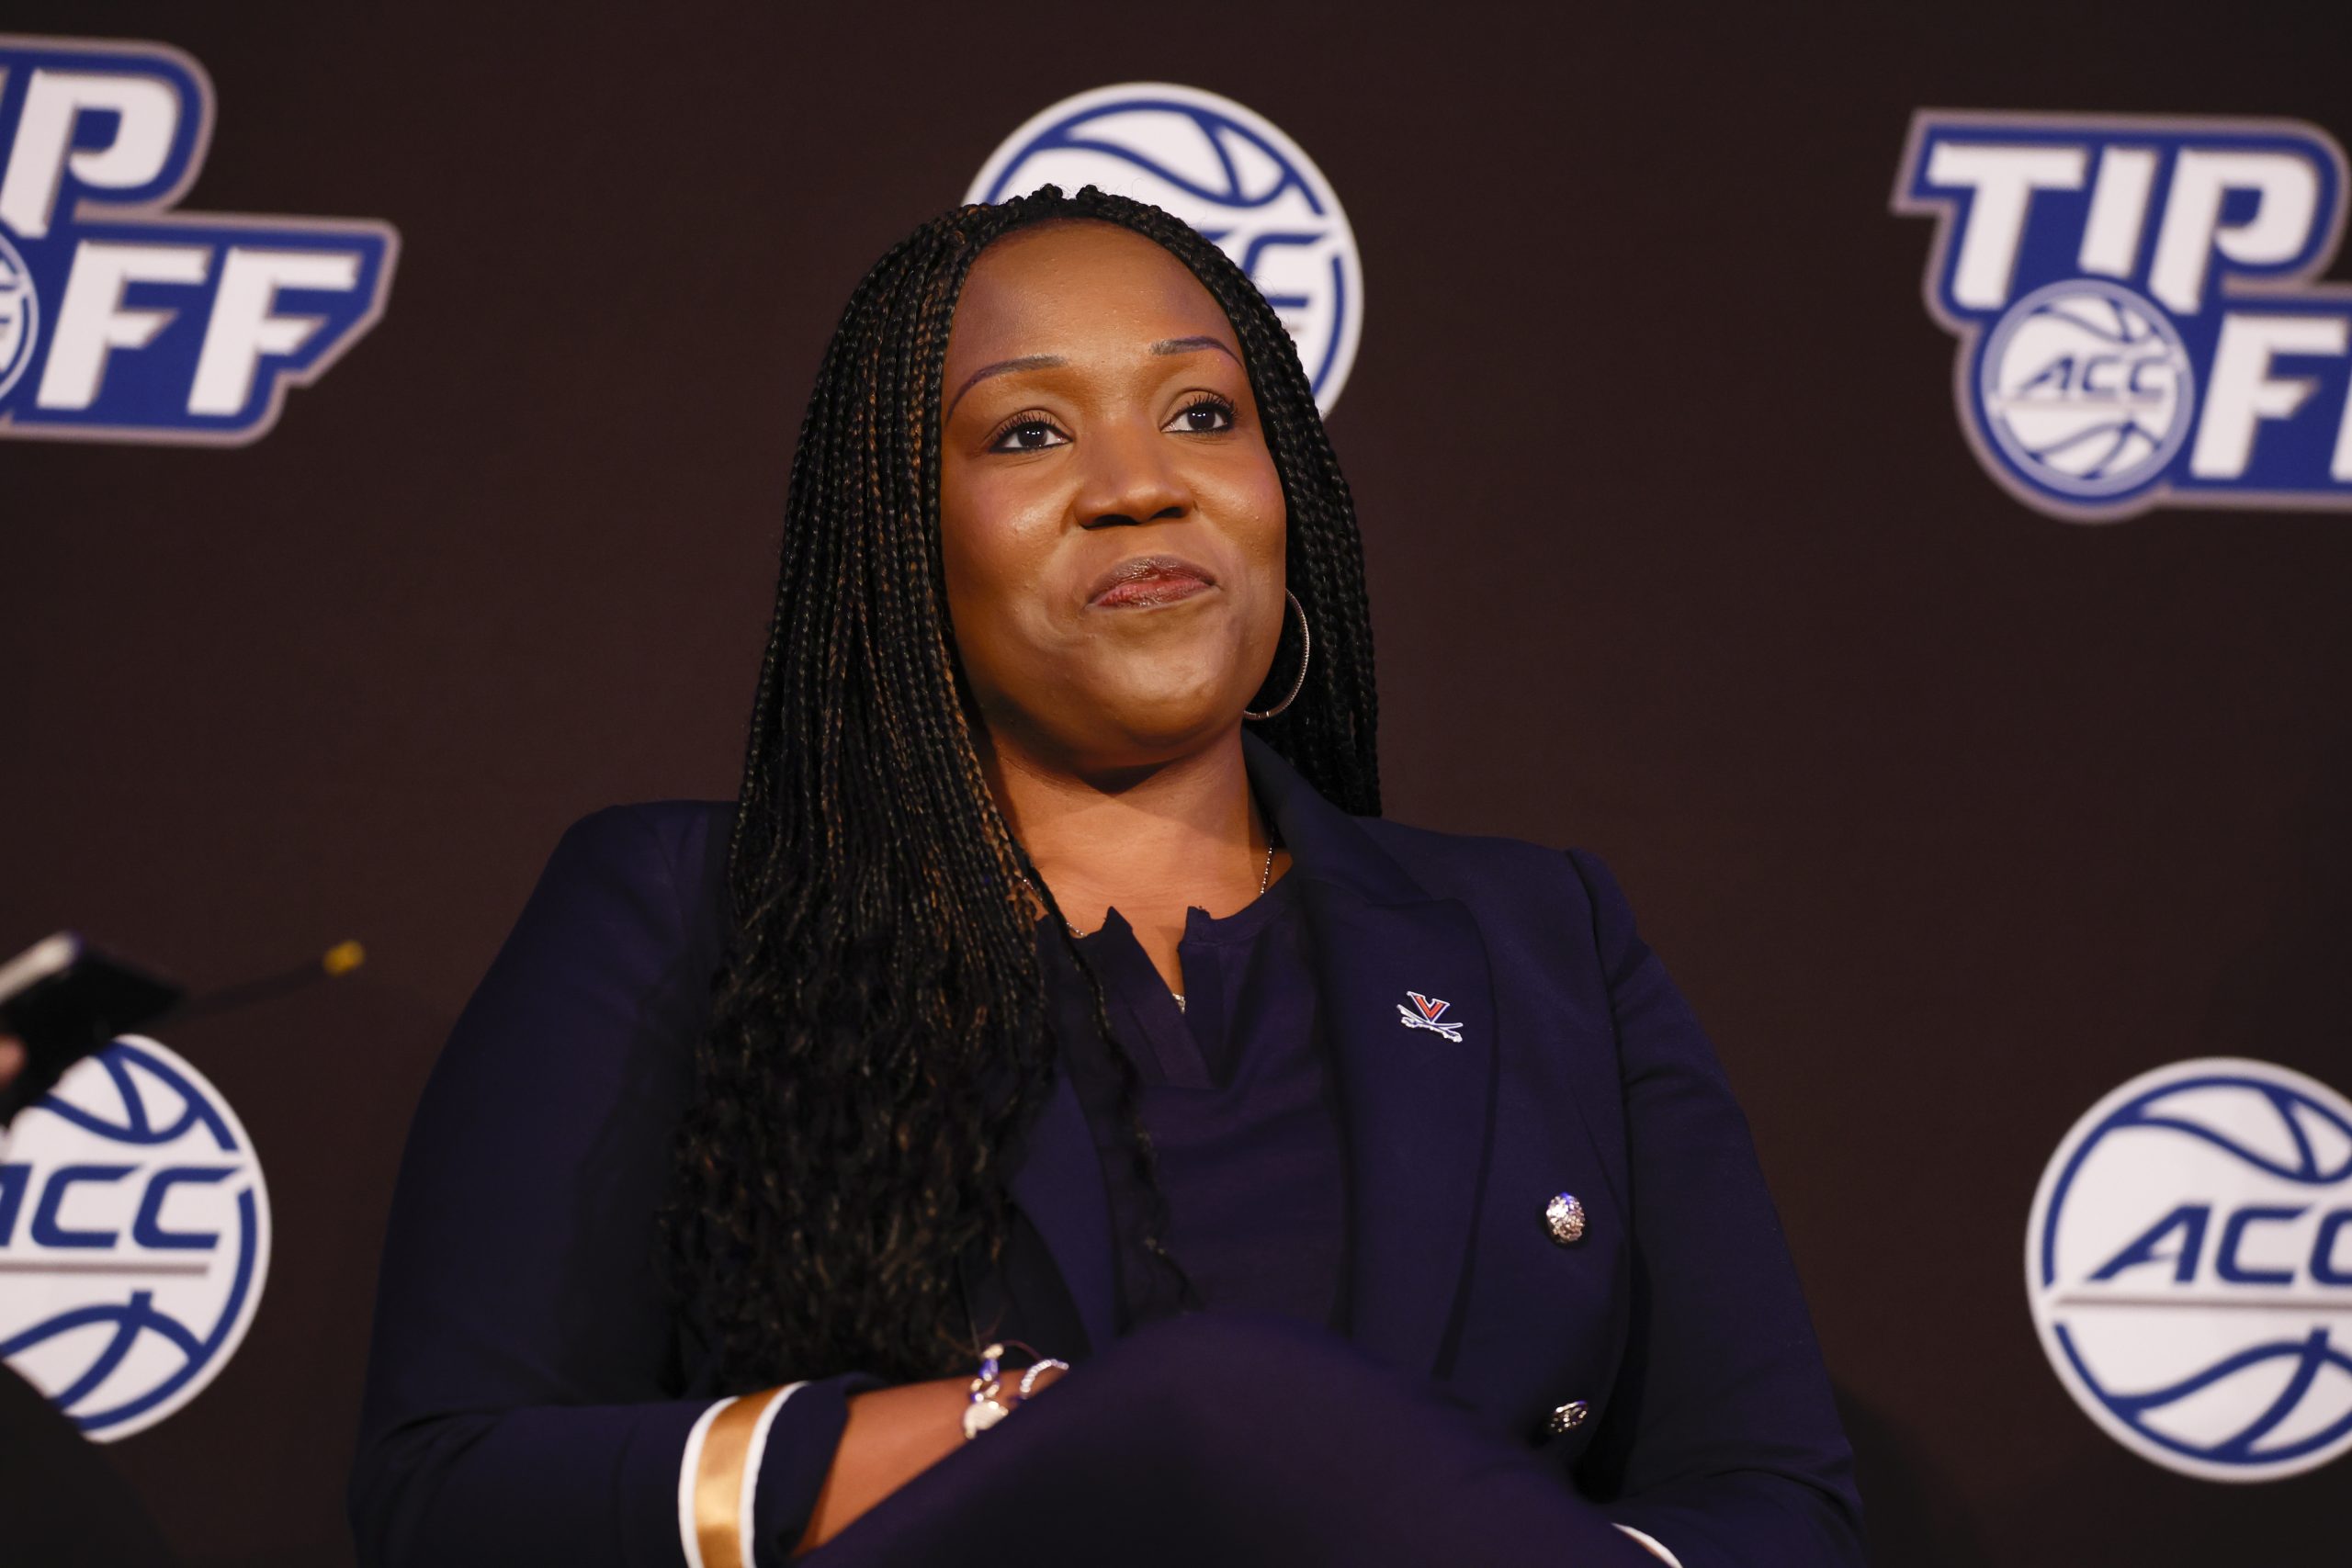 UVA's Coach Mox living a dream, ready to mix it up in ACC women's hoops